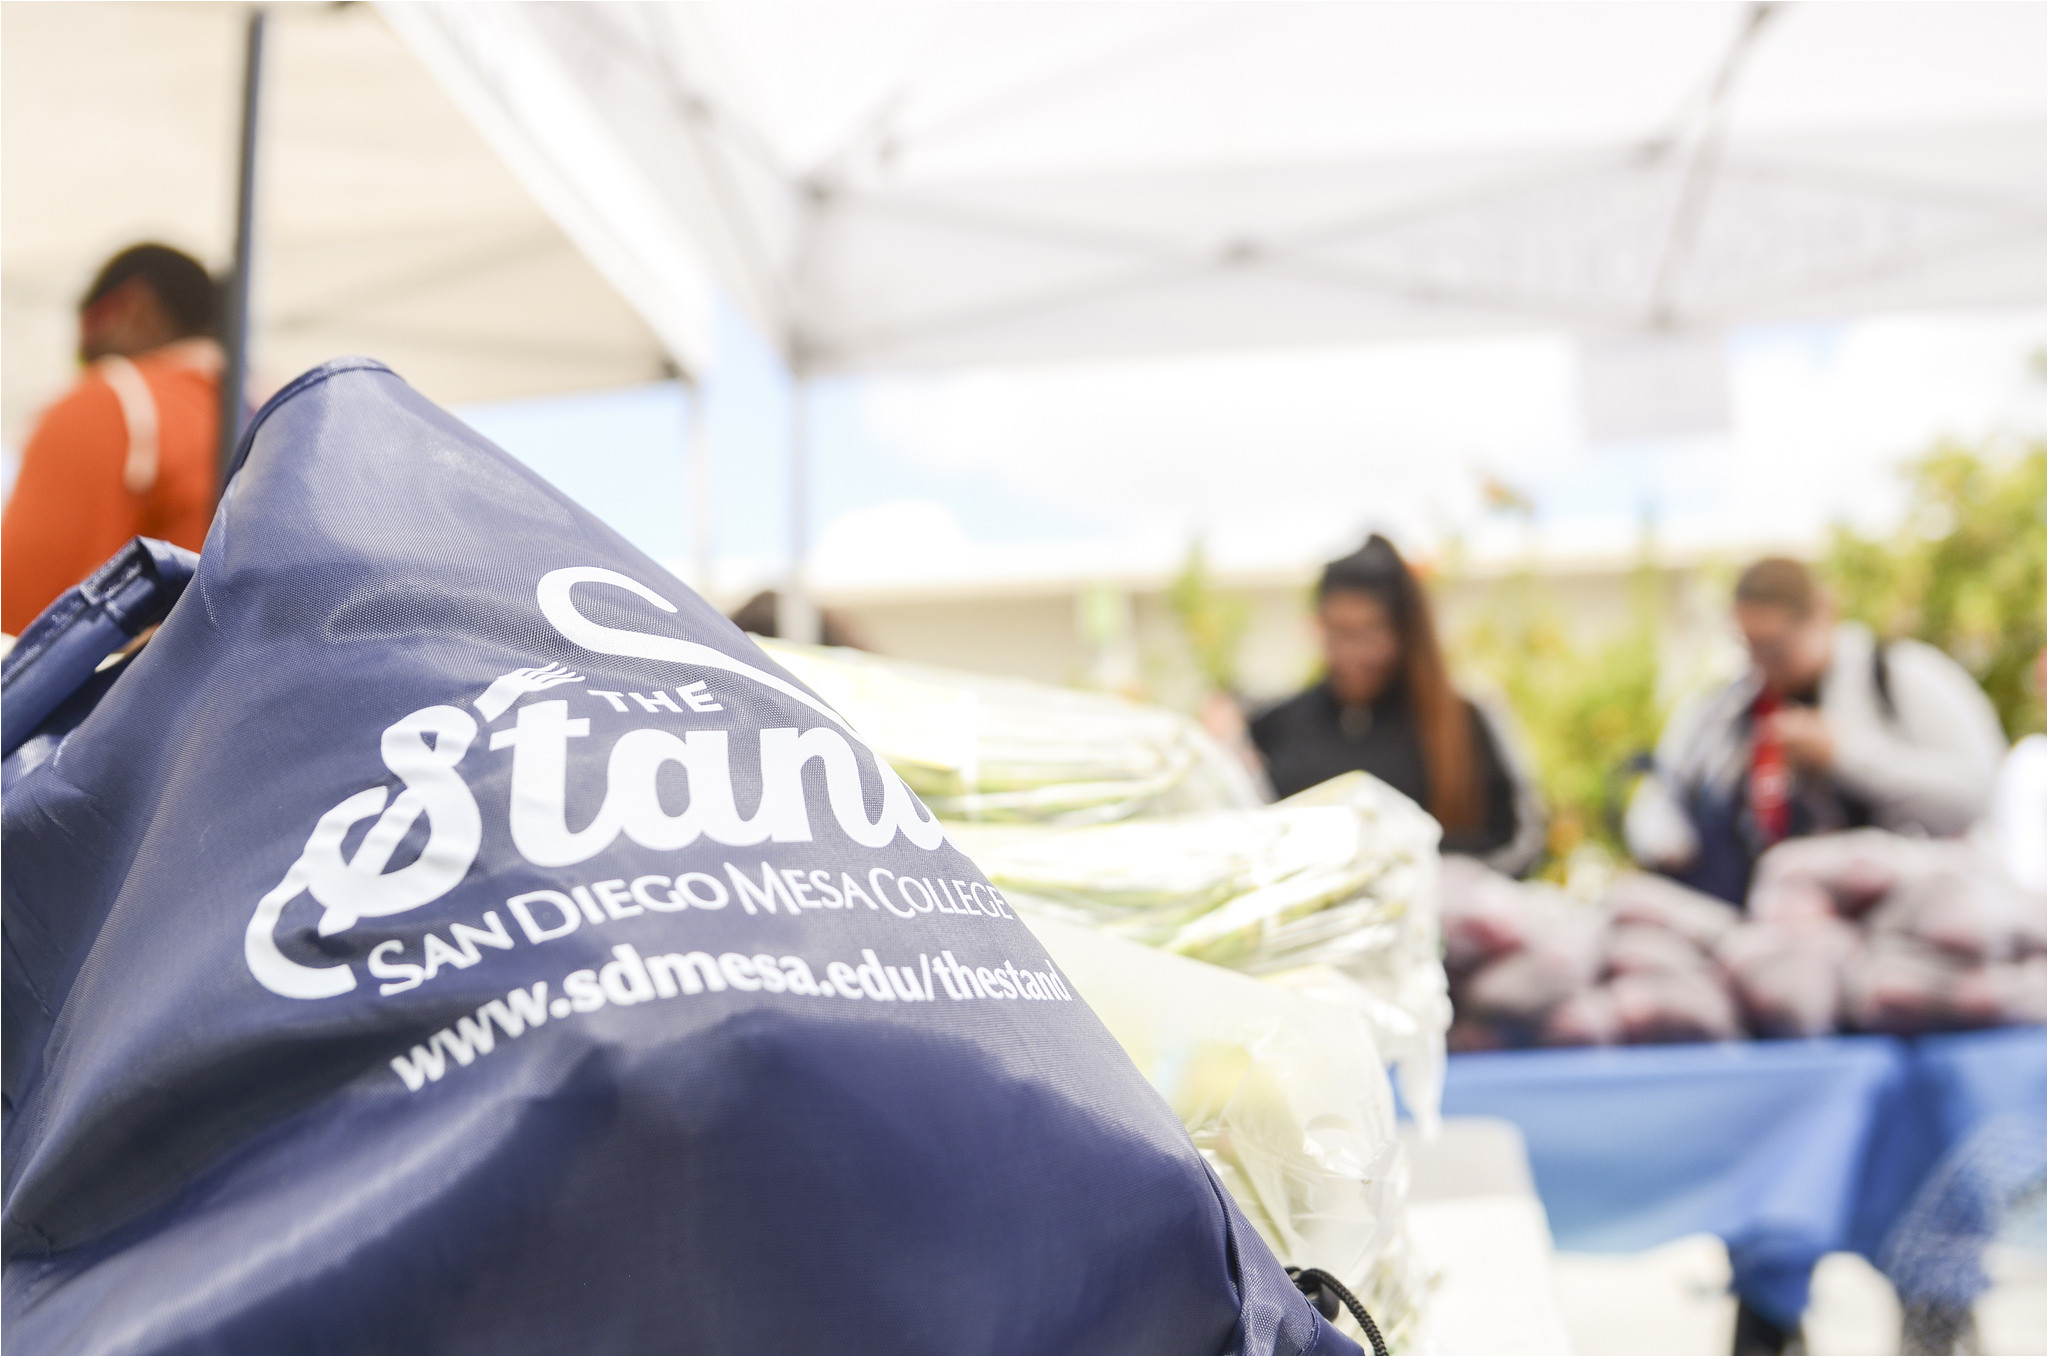 free farmers market at mesa college featured image